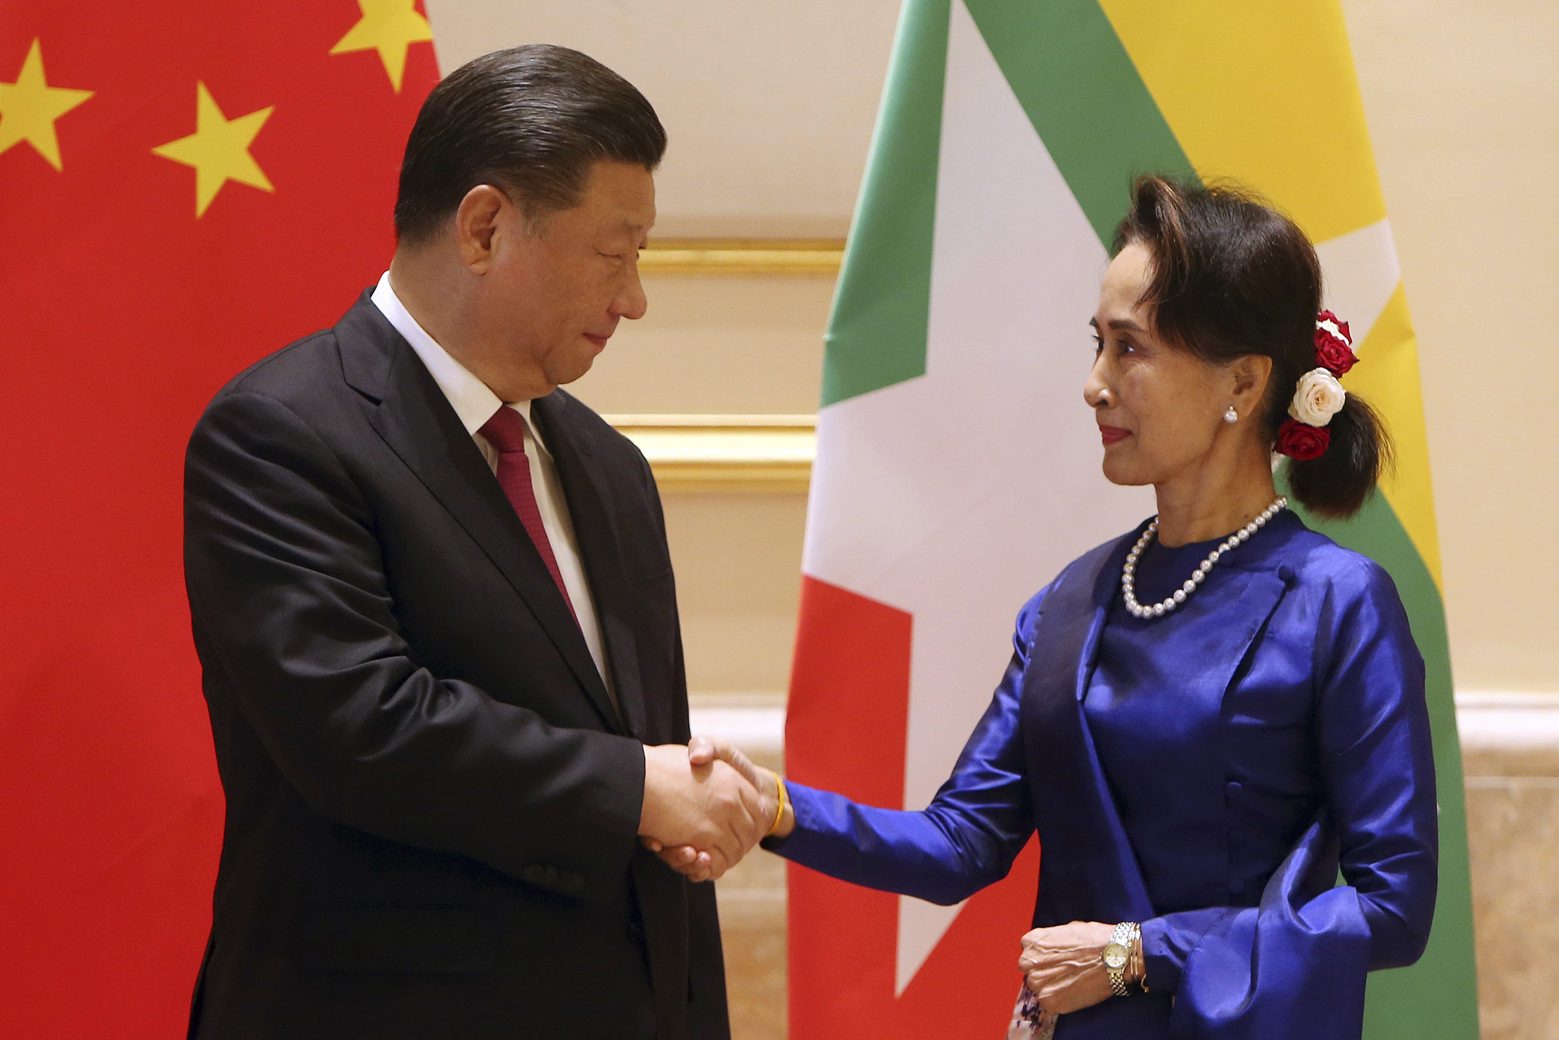 Myanmar's leader Aung San Suu Kyi, right, shakes hands with Chinese President Xi Jinping during their meeting at the Presidential Palace in Naypyitaw, Myanmar, Friday, Jan. 17, 2020. (AP Photo/Aung Shine Oo) Myanmar China